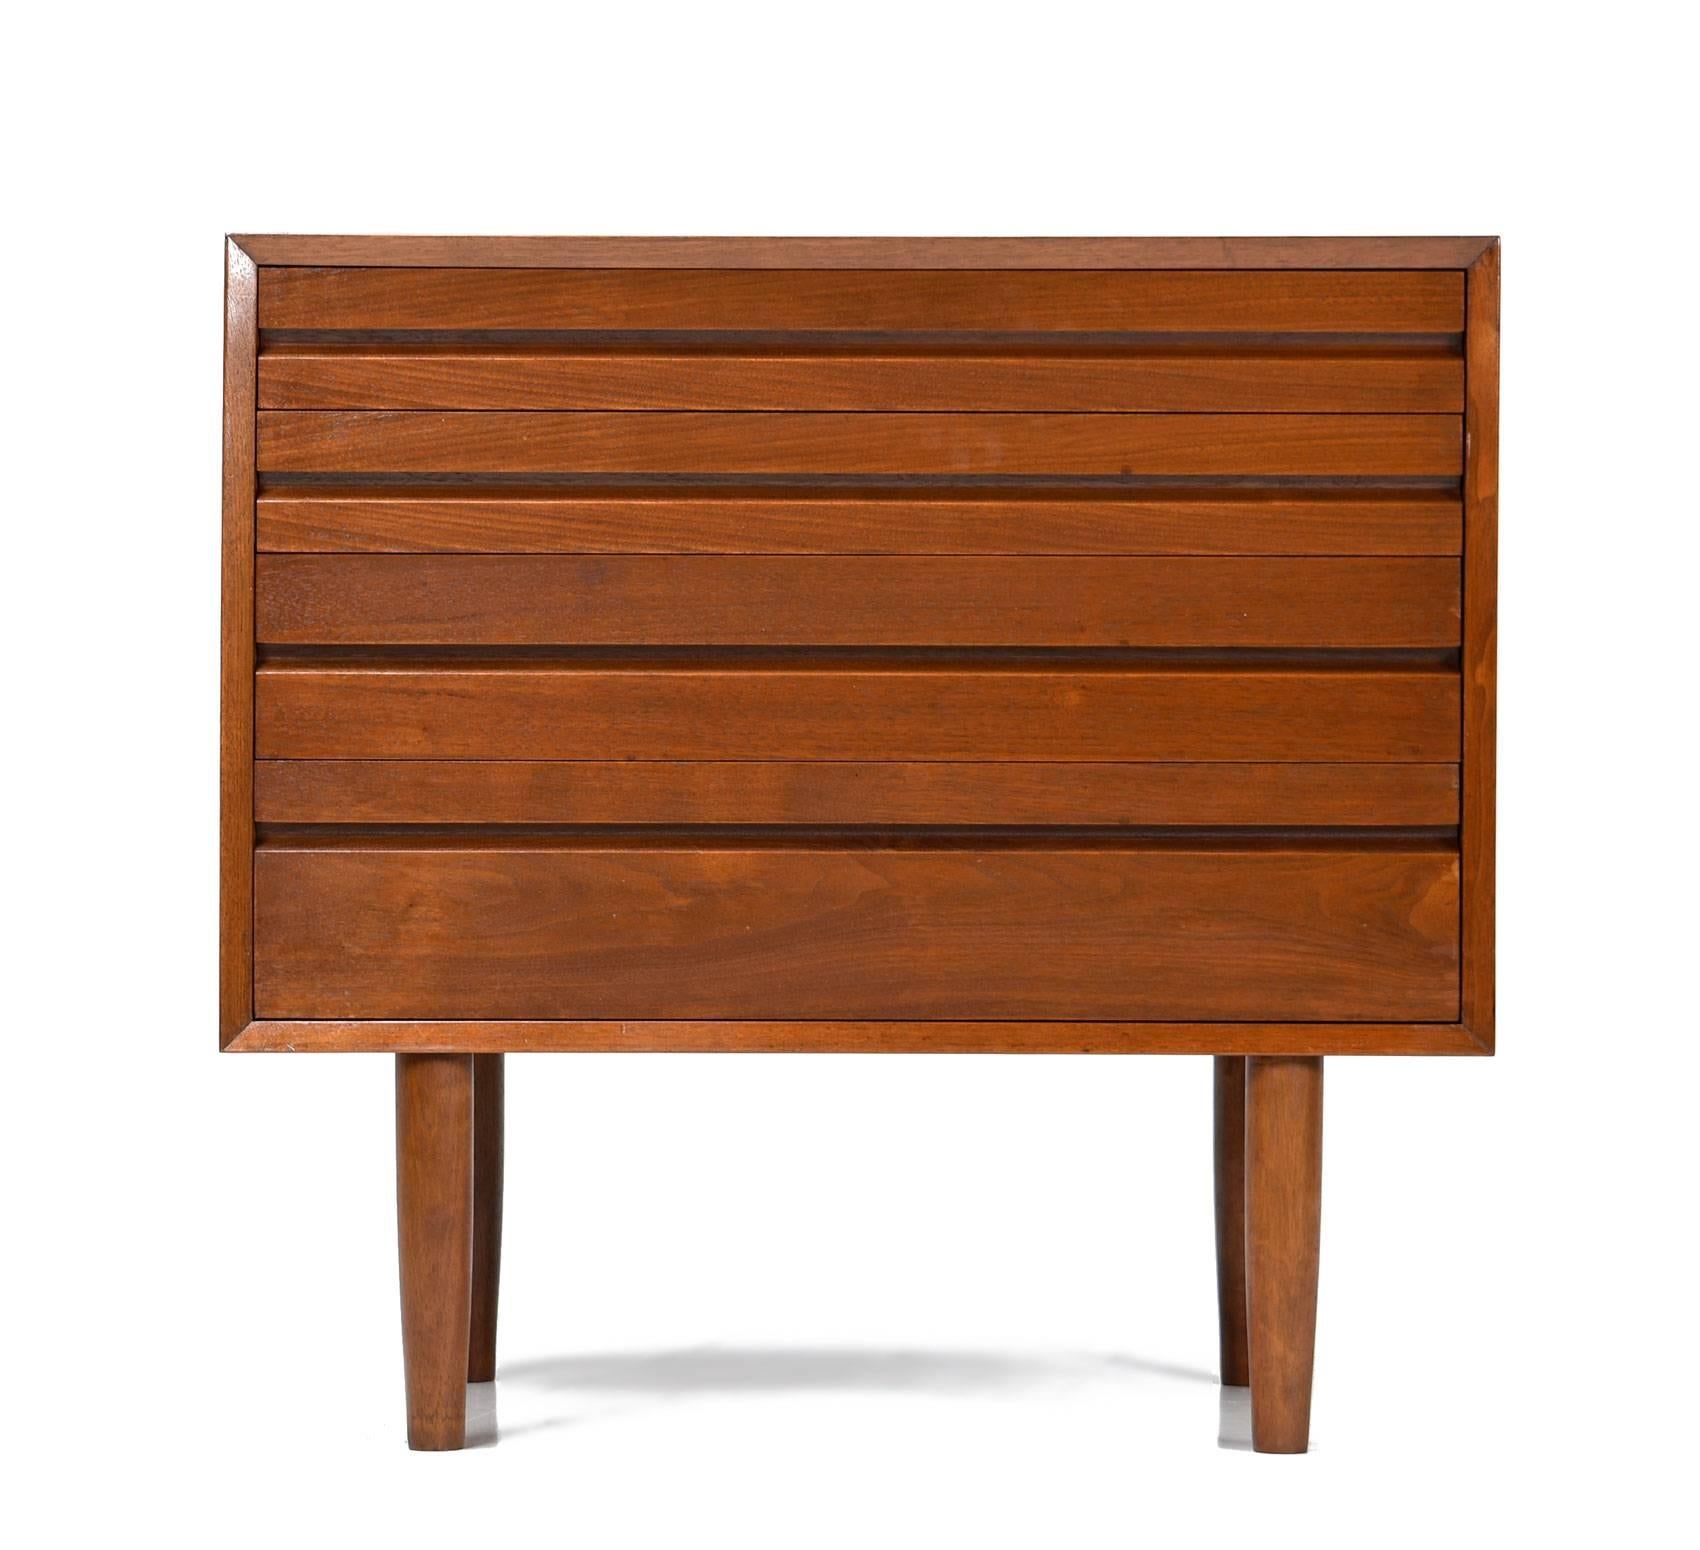 Sleek Danish modern designed four-drawer cabinet. Solid pine core construction with stunning walnut veneer and dovetail joinery.